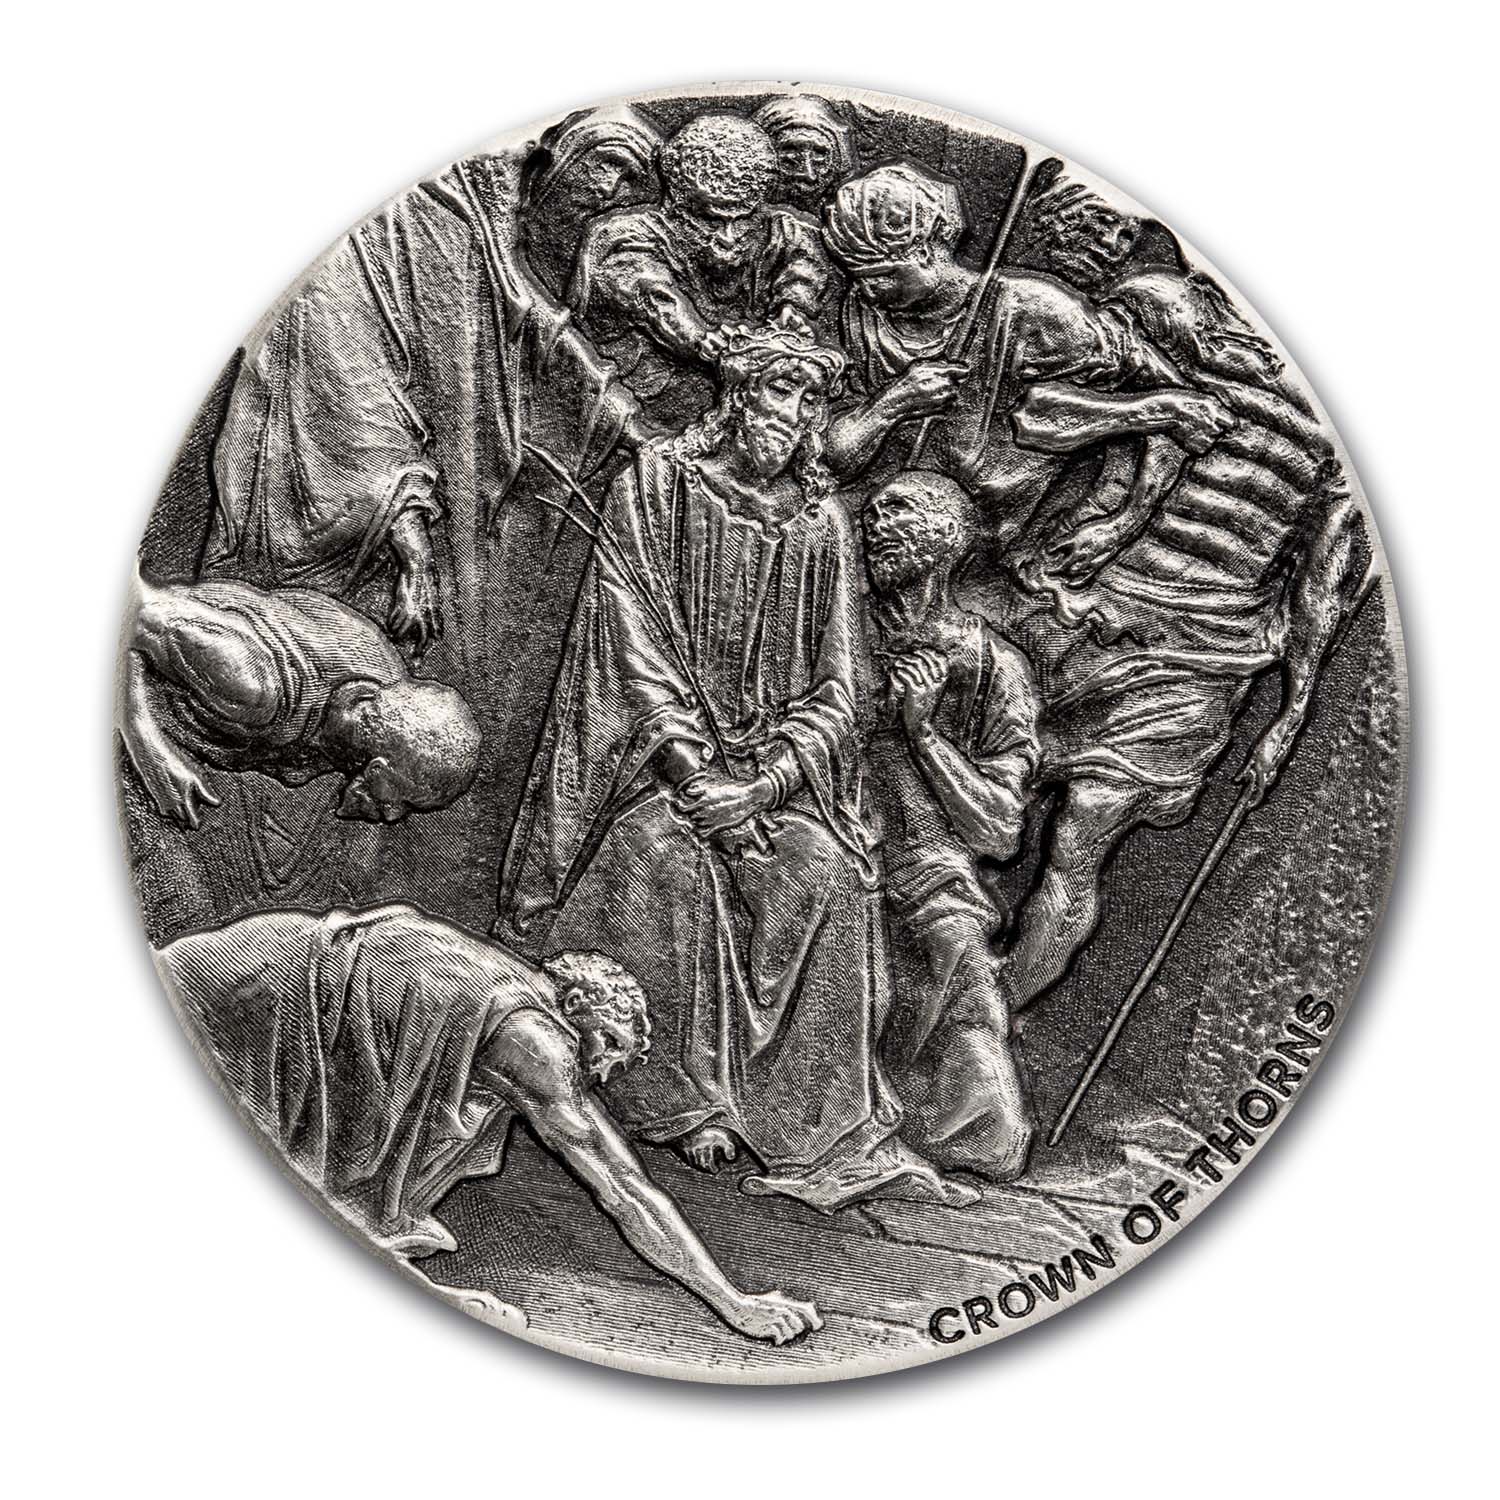 Buy 2019 2 oz Silver Coin - Biblical Series (Crown of Thorns)